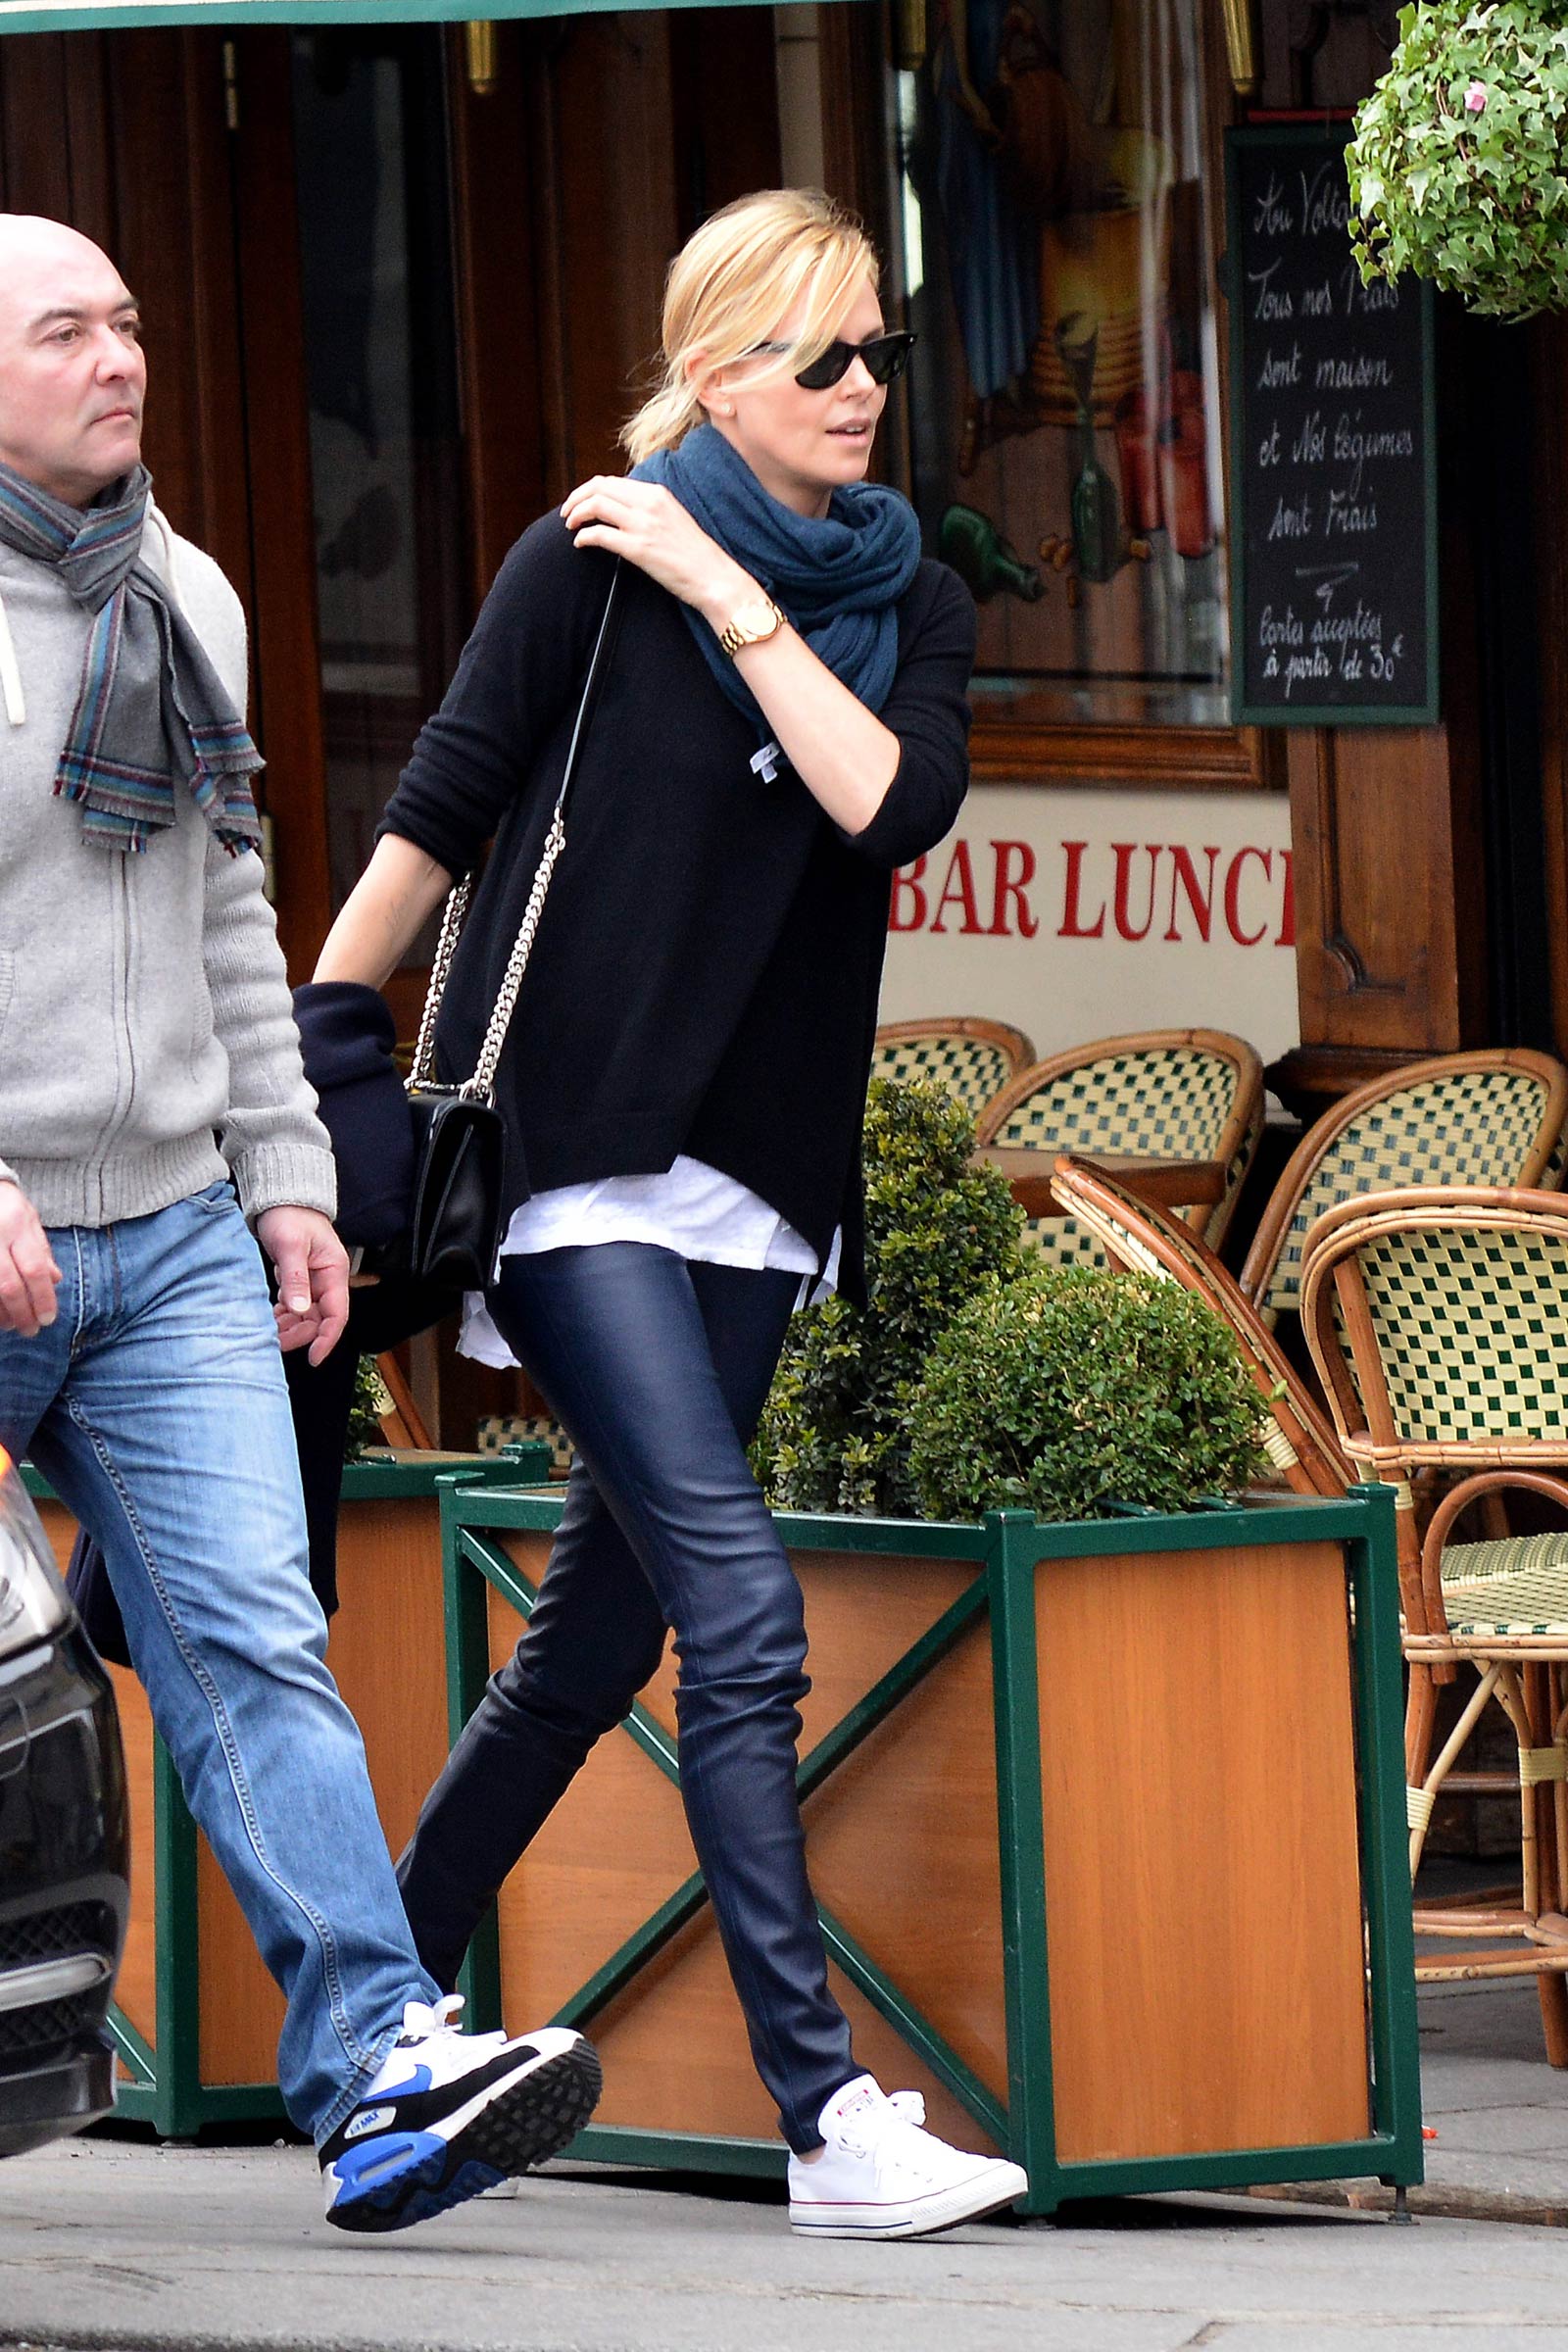 Charlize Theron at Le Voltaire restaurant